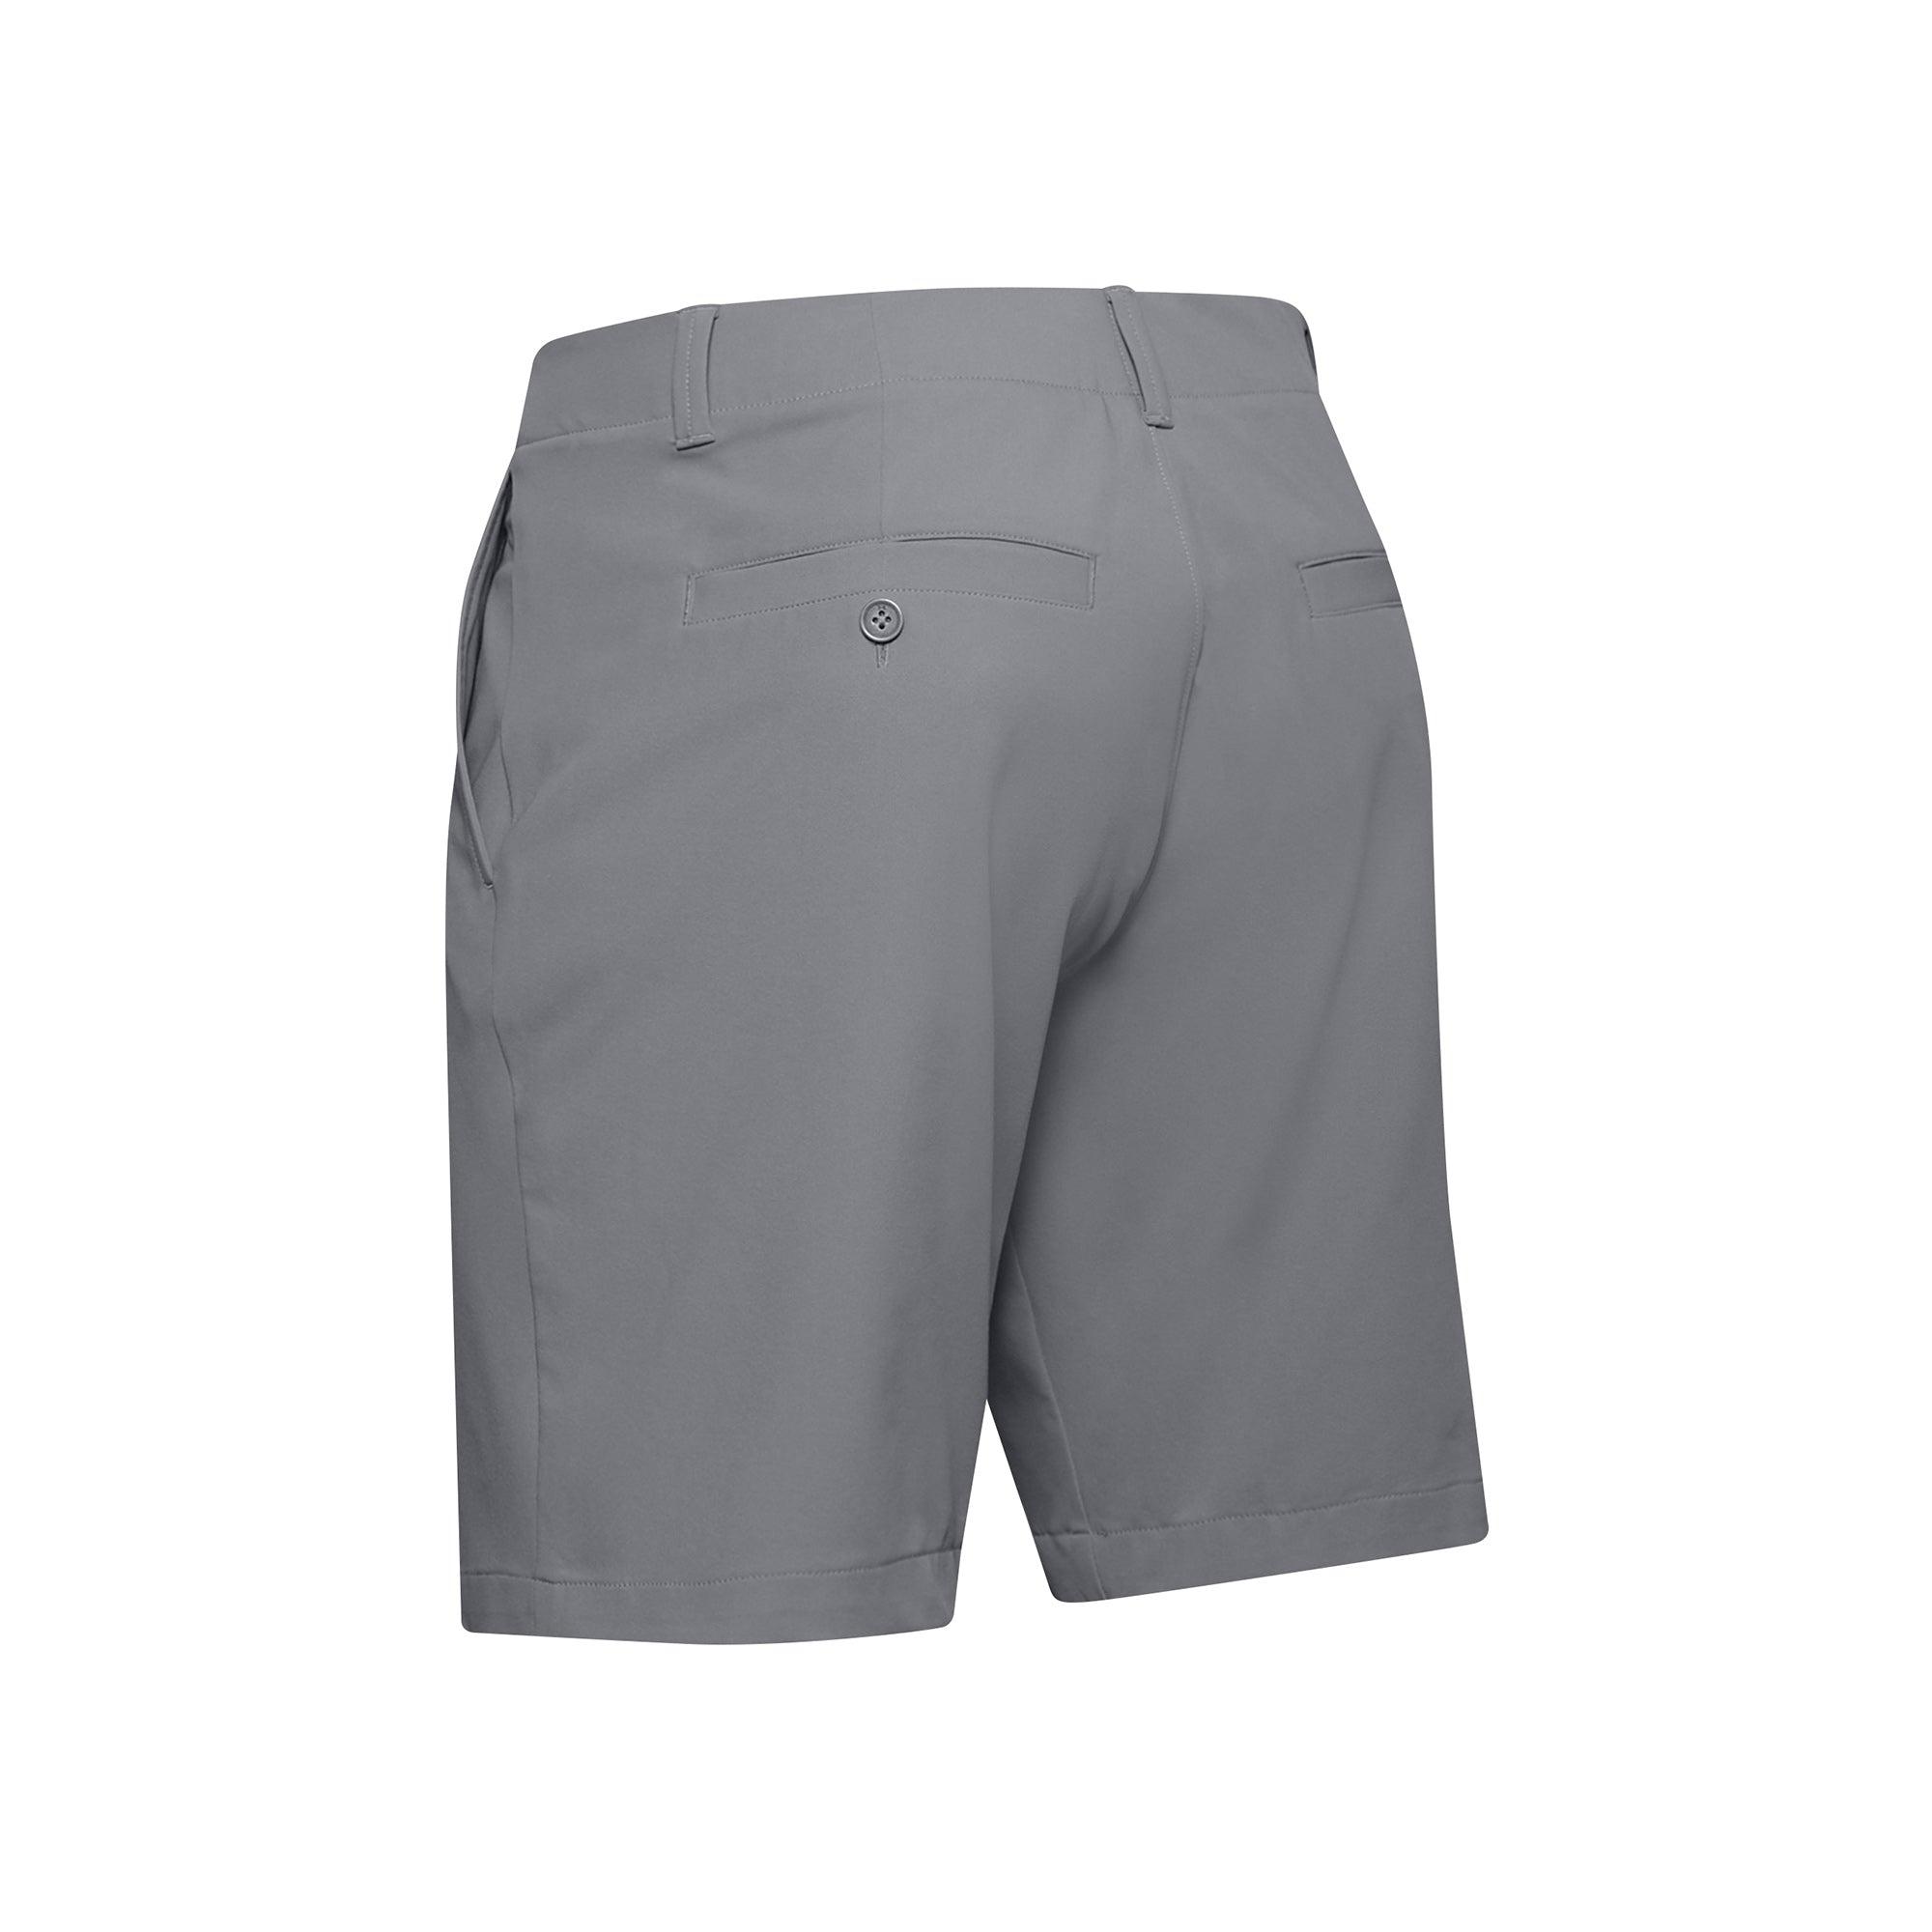 Quần ngắn thể thao nam Under Armour Iso-Chill - 1358785-035